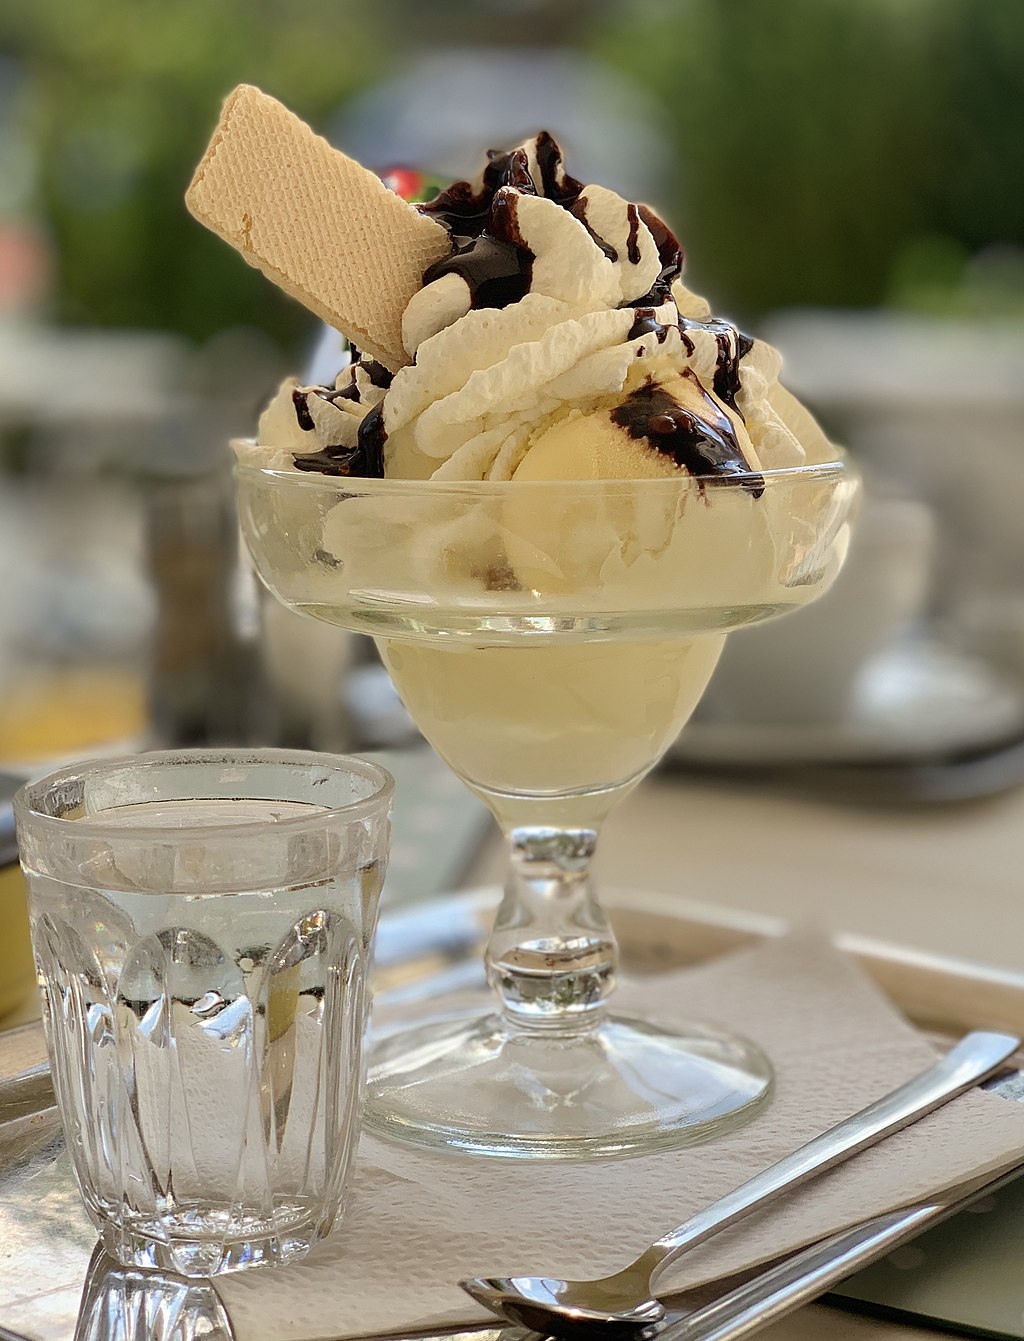 https://upload.wikimedia.org/wikipedia/commons/thumb/2/2e/Ice_cream_with_whipped_cream%2C_chocolate_syrup%2C_and_a_wafer_%28cropped%29.jpg/1024px-Ice_cream_with_whipped_cream%2C_chocolate_syrup%2C_and_a_wafer_%28cropped%29.jpg